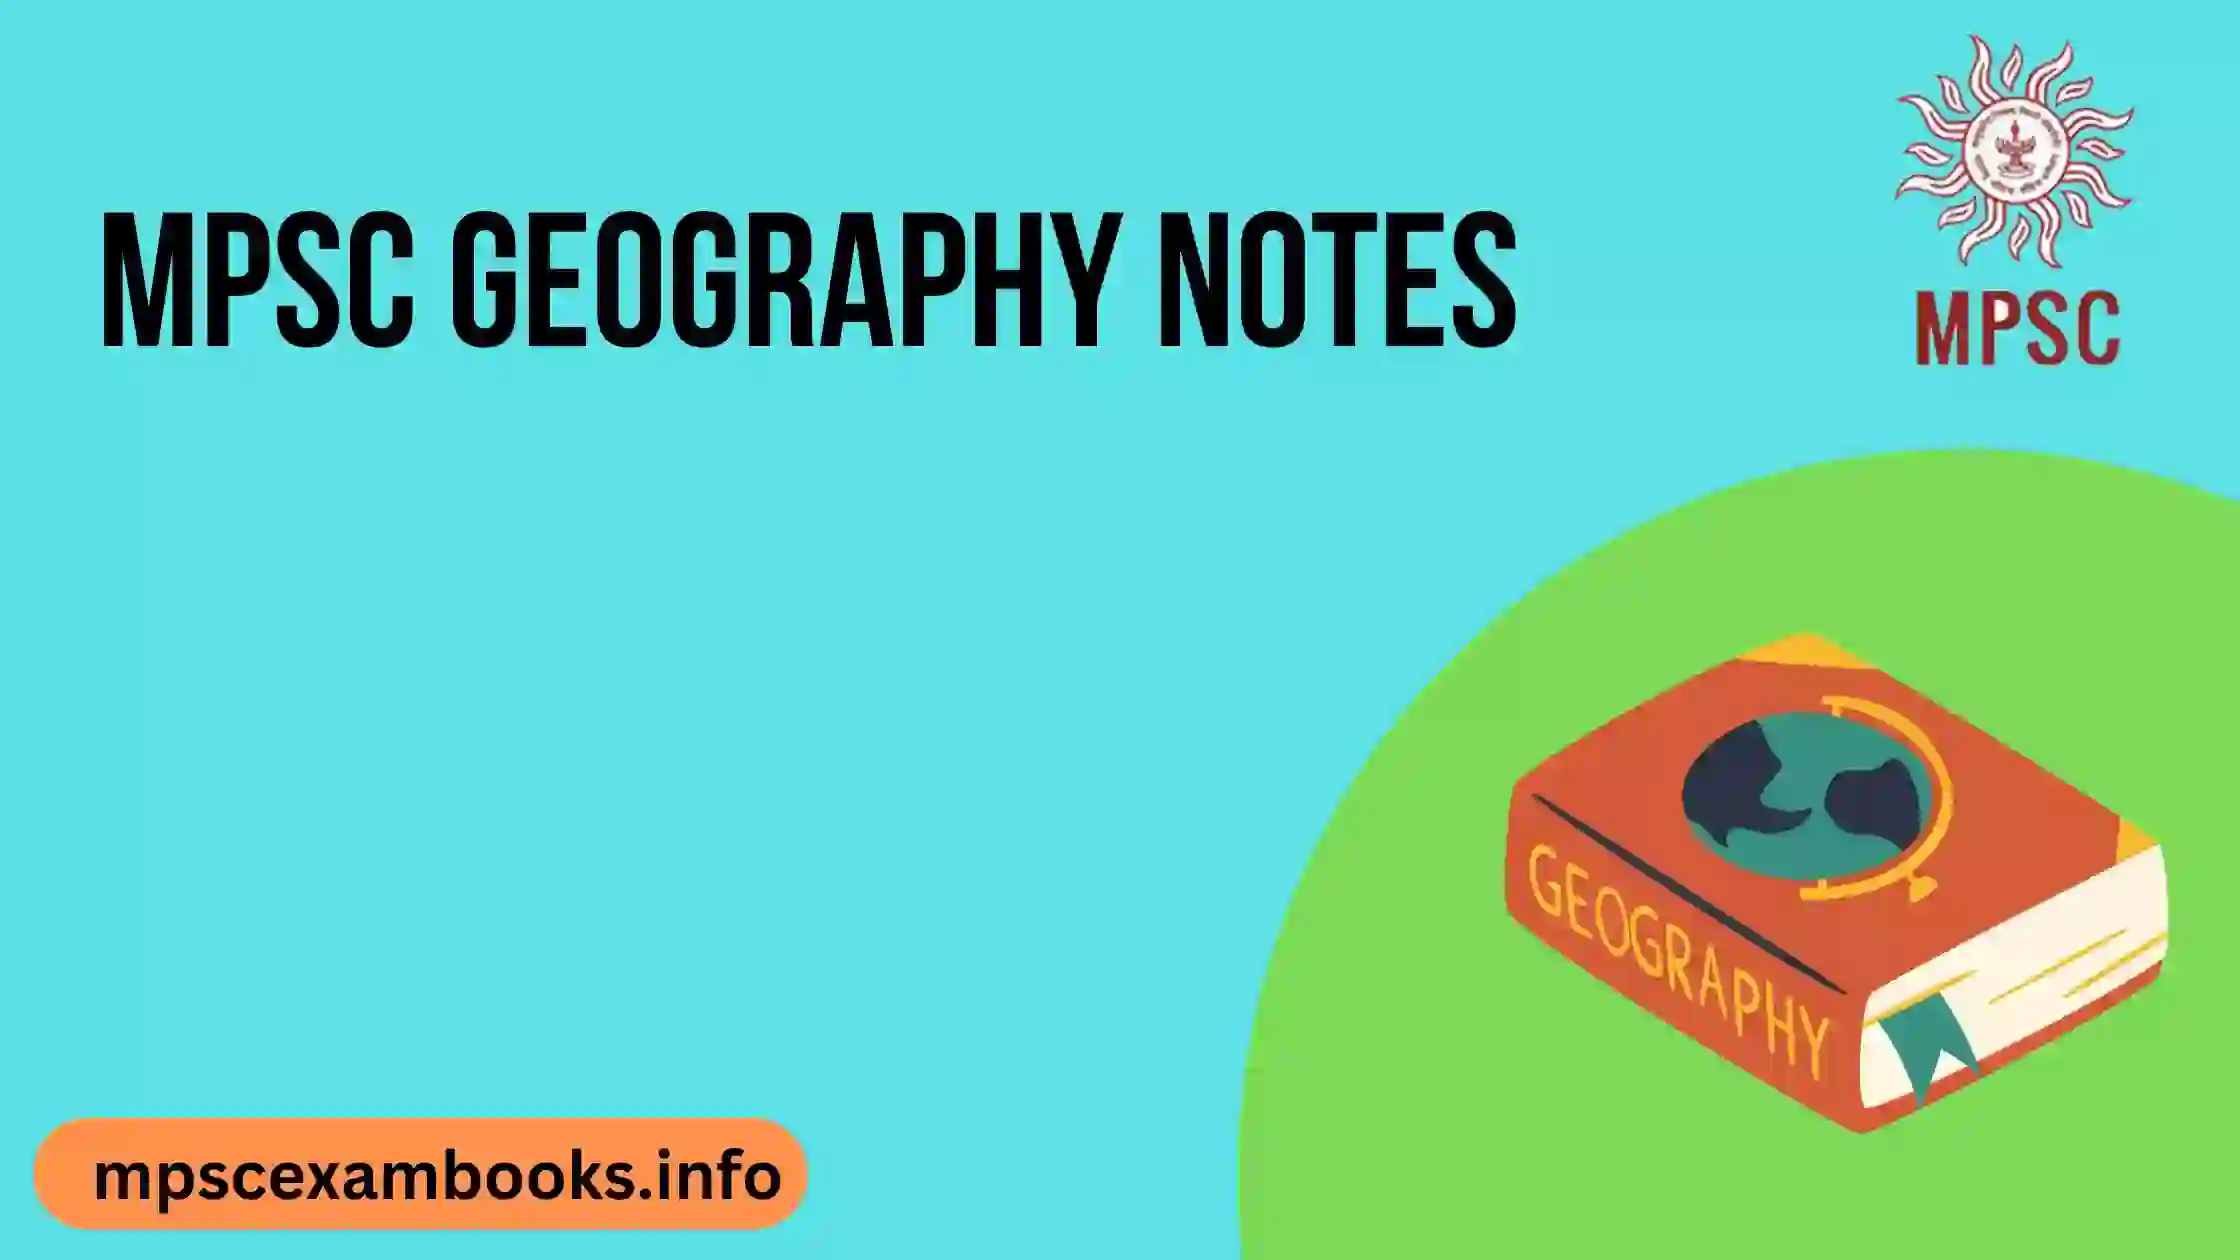 MPSC Geography books PDF| MPSC Geography Notes